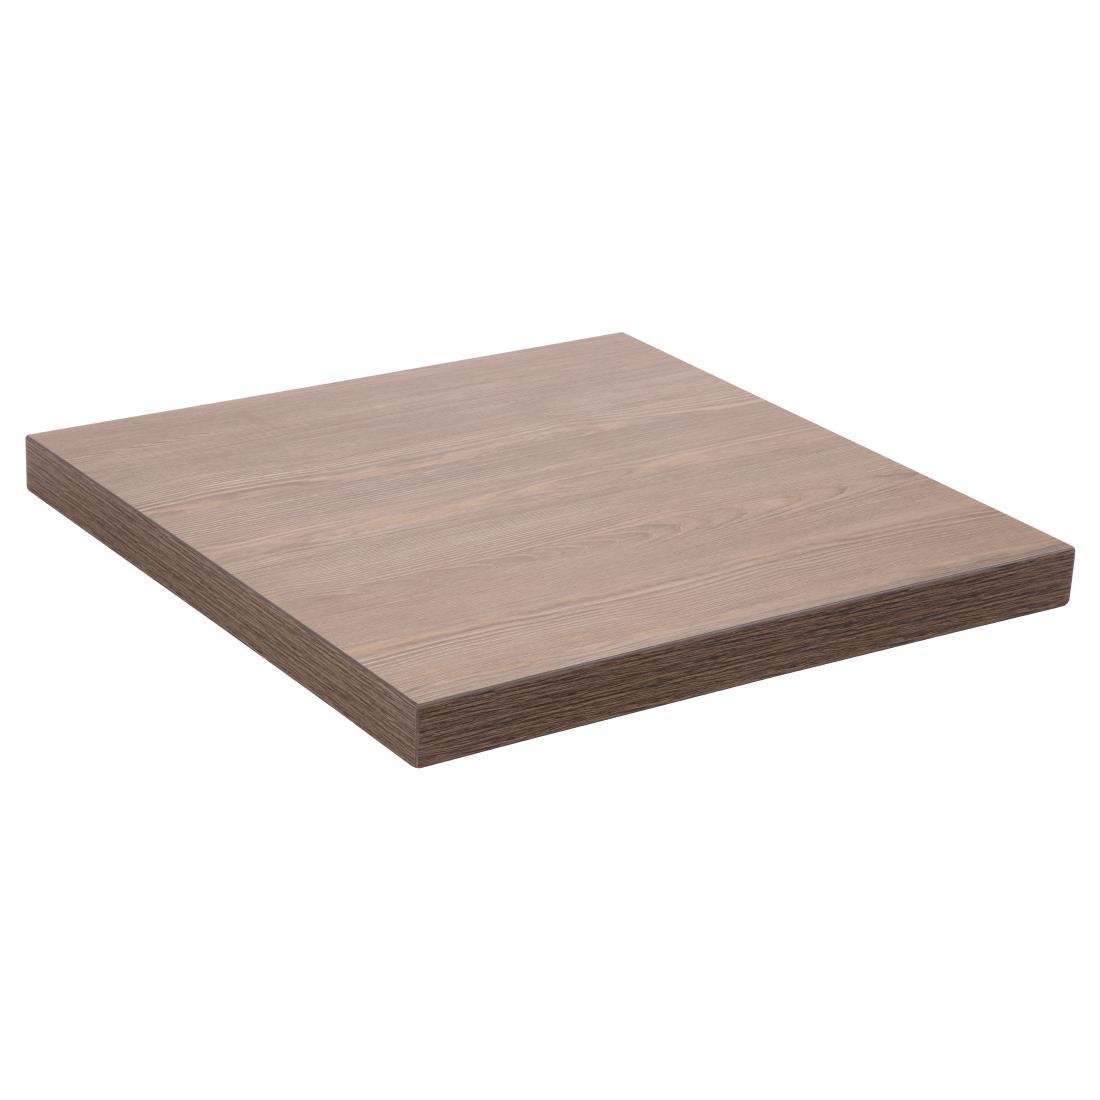 Bolero Pre-drilled Square Table Top Vintage Wood 700mm - GR329  - 2